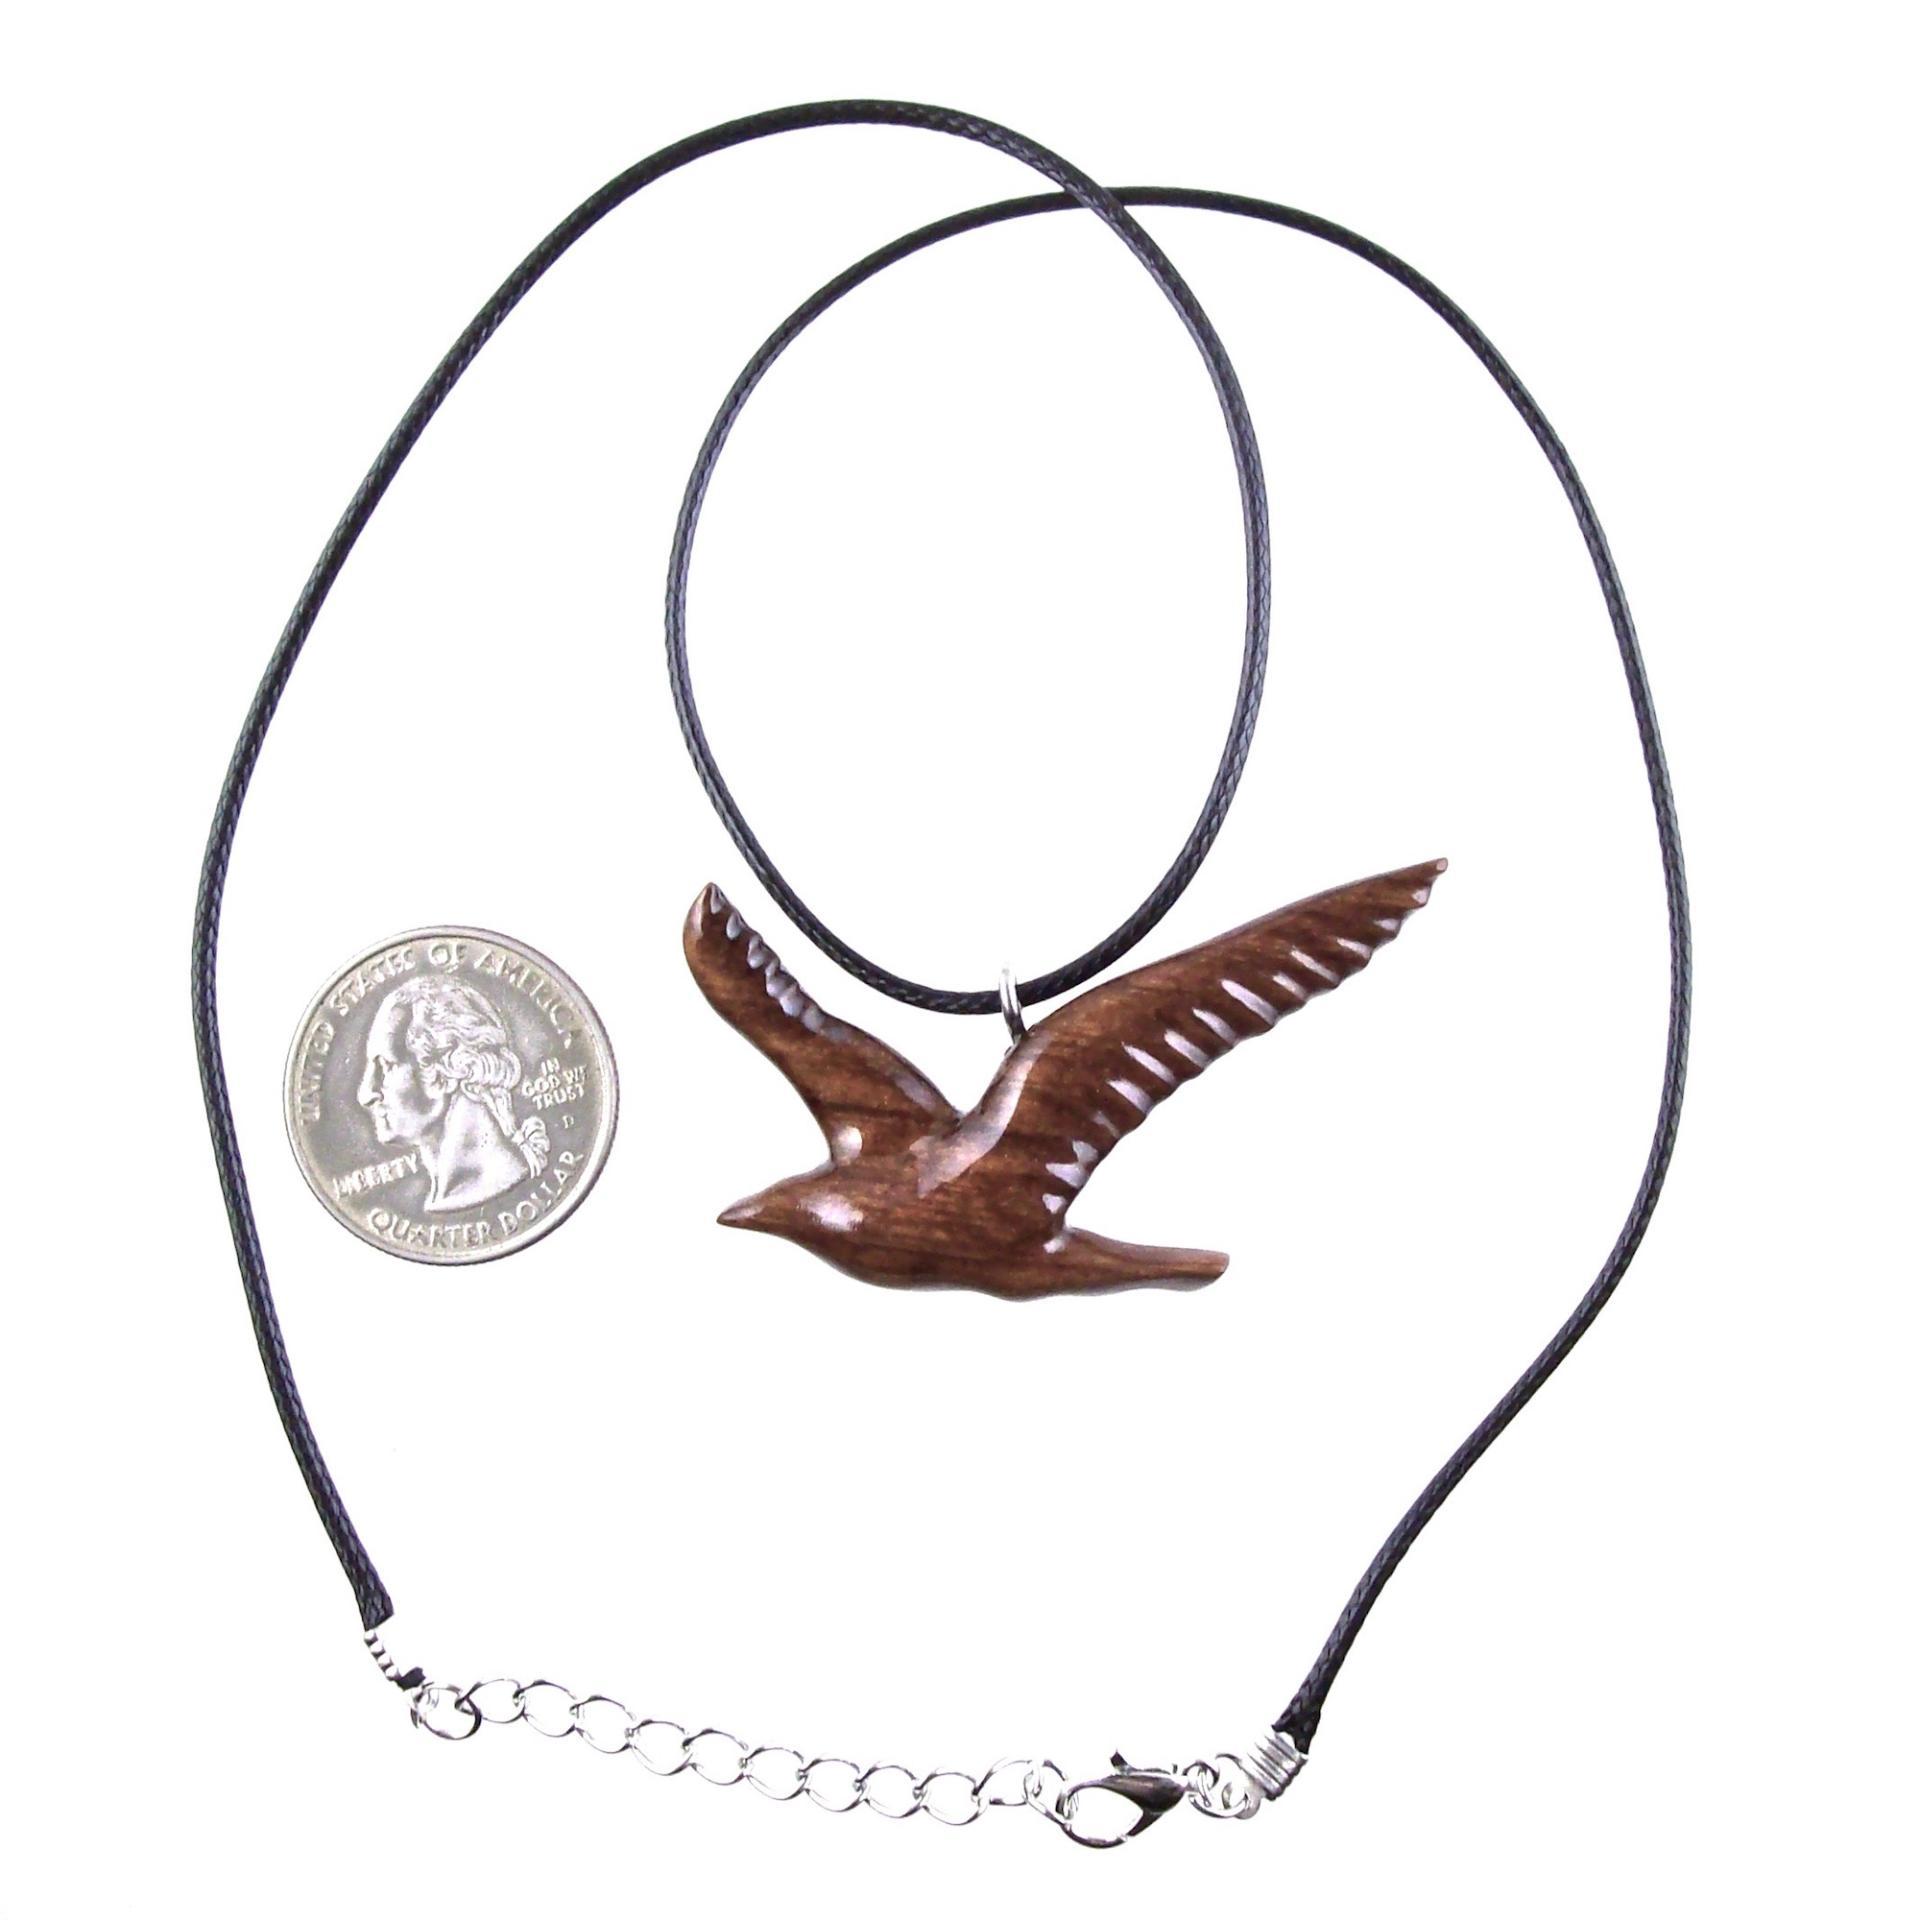 Hand Carved Wooden Bird Pendant, Seagull Necklace, Wood Jewelry, One of a Kind Gift for Her Him